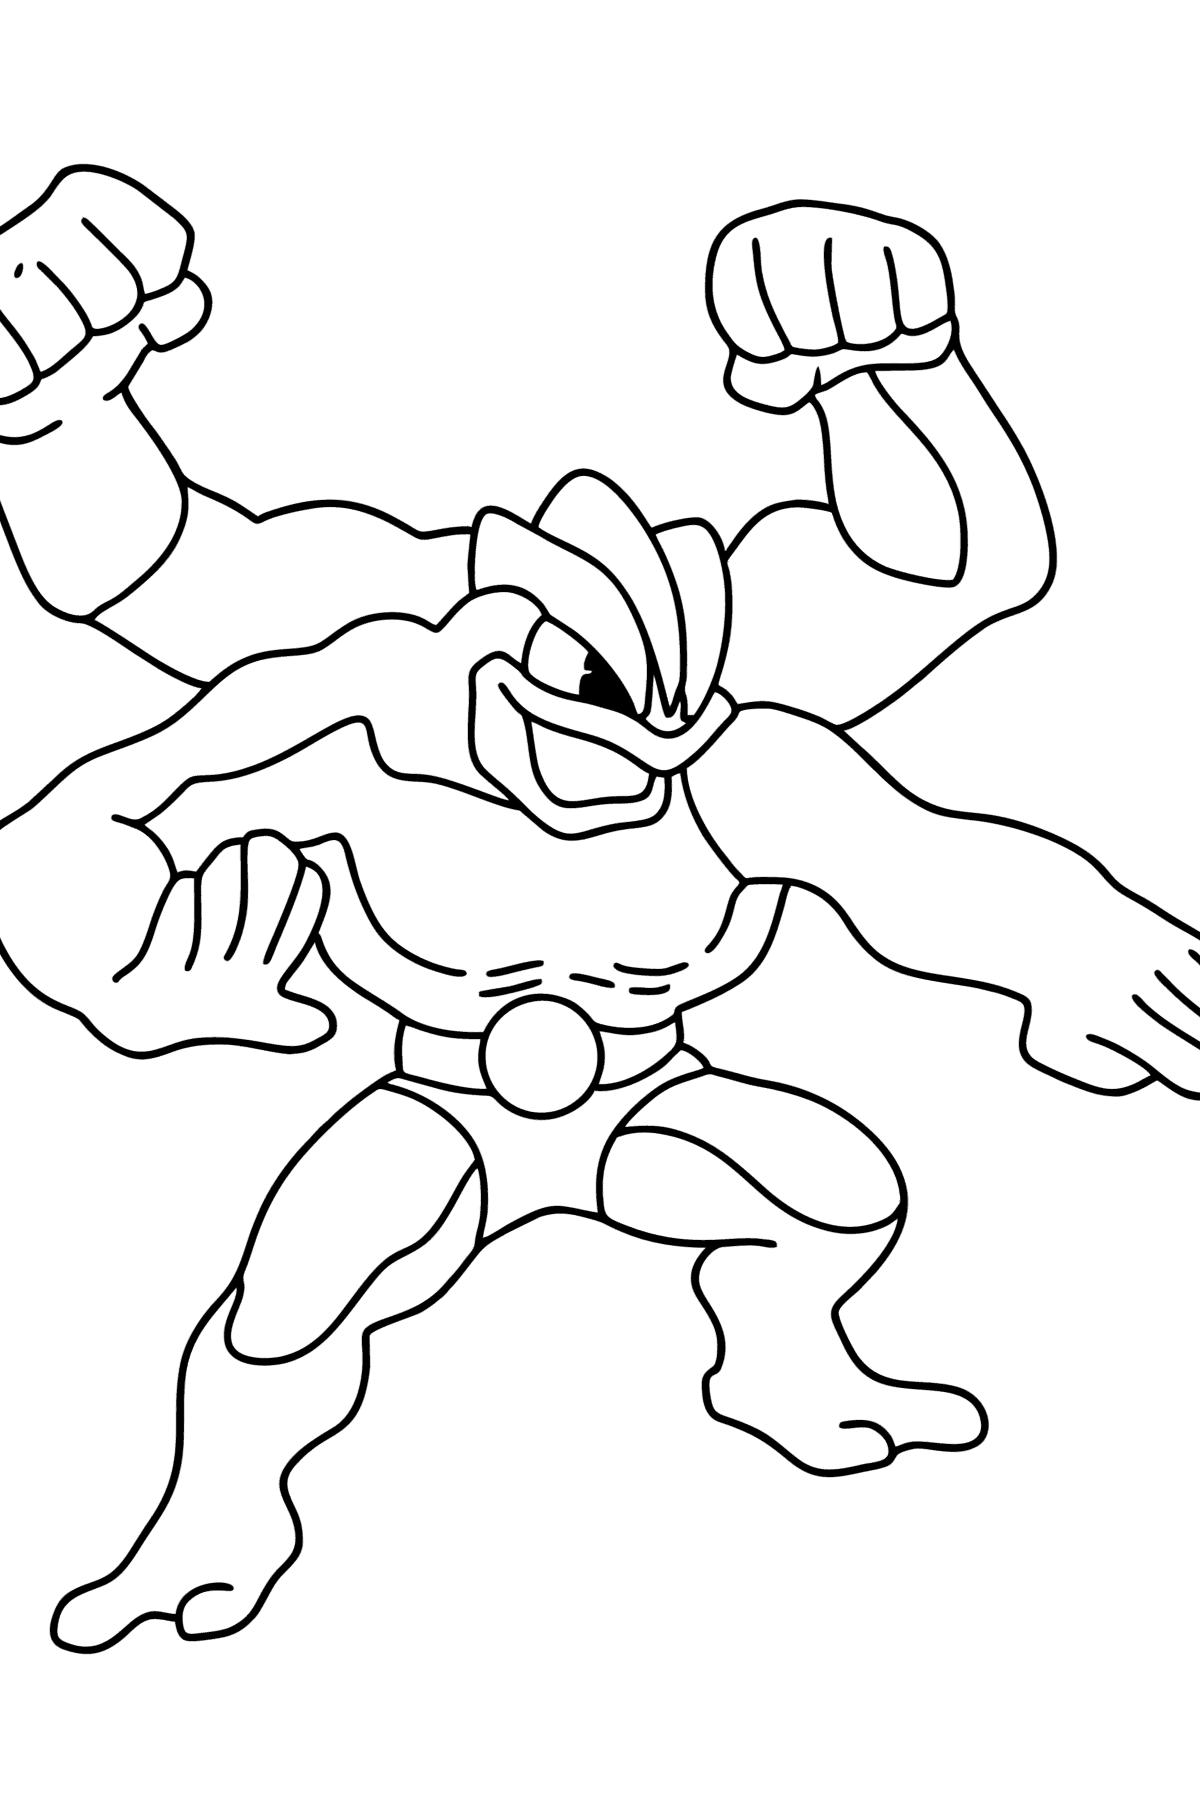 Coloring page Pokemon Go Machamp - Coloring Pages for Kids